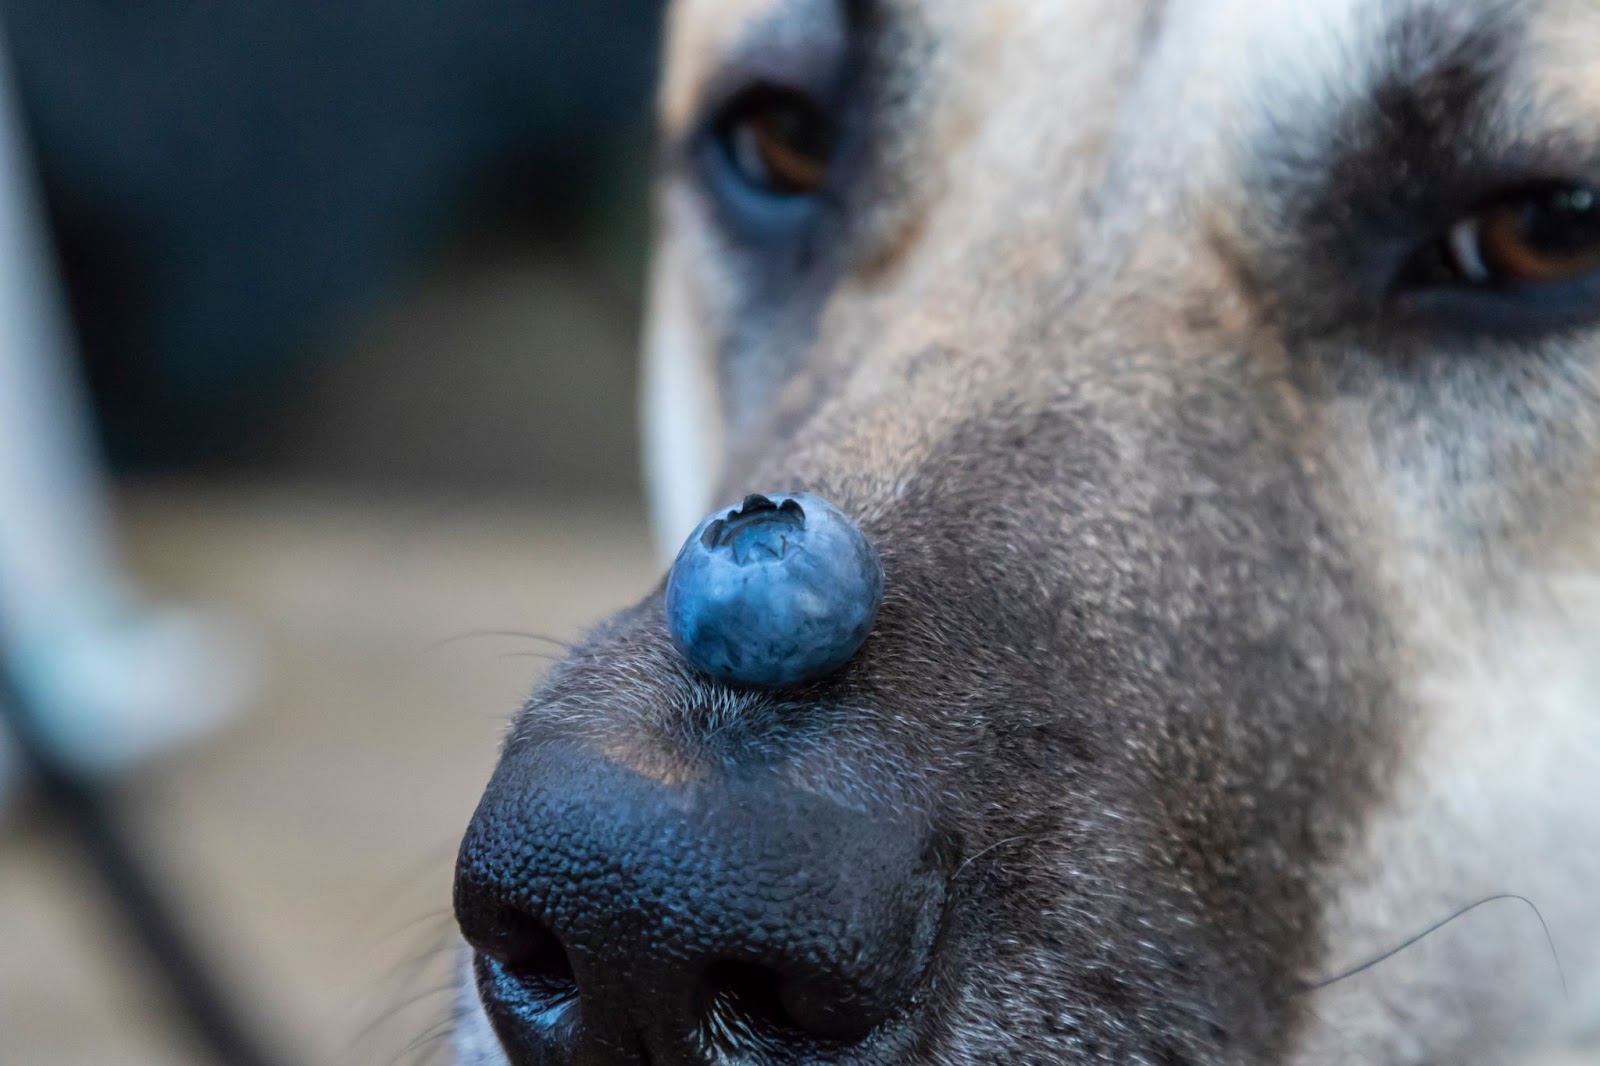 A Cute dog with a blueberry on his nose